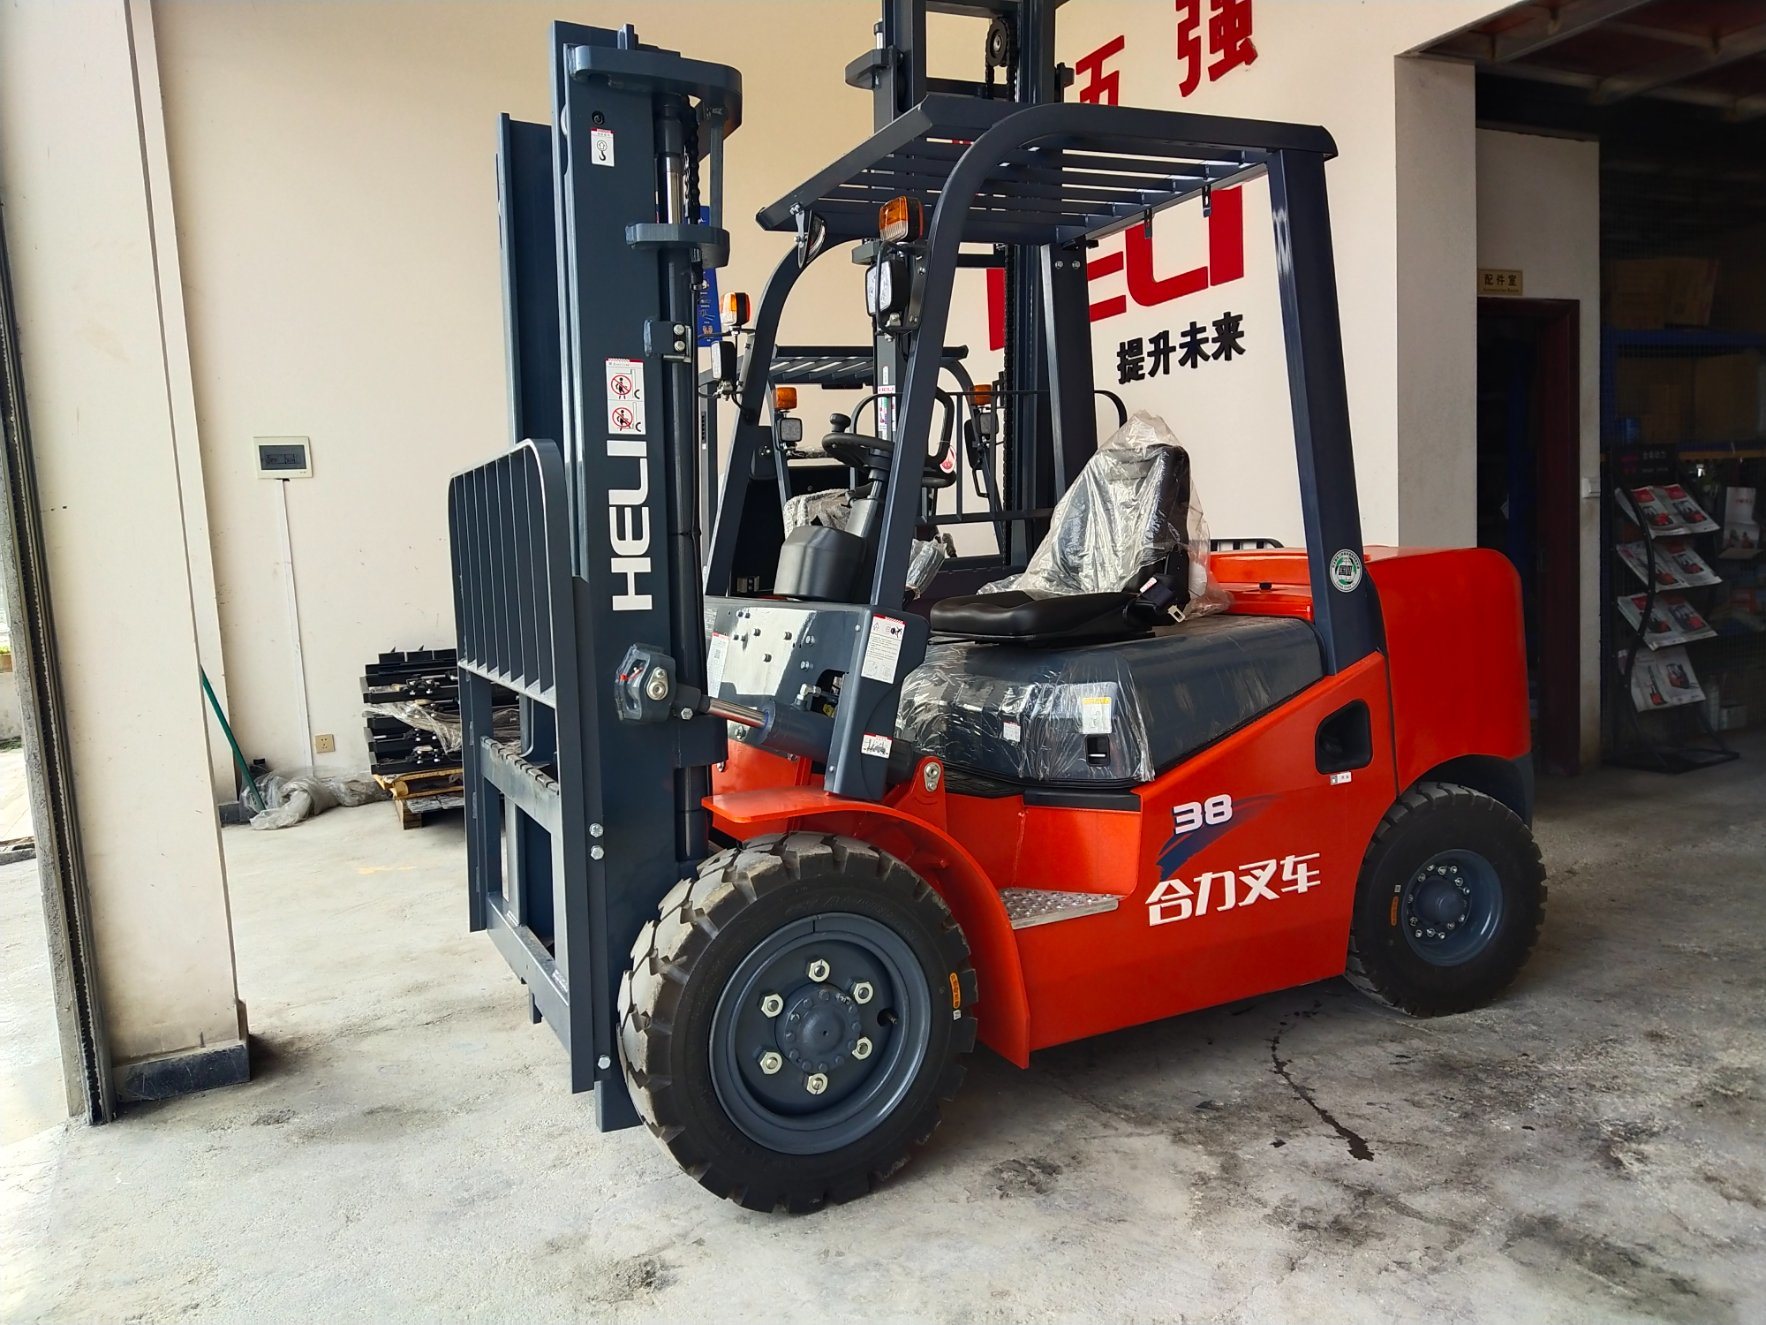 3.8ton Heli Forklift Japan Engine Small Diesel Forklift Price Cpcd38-Wk